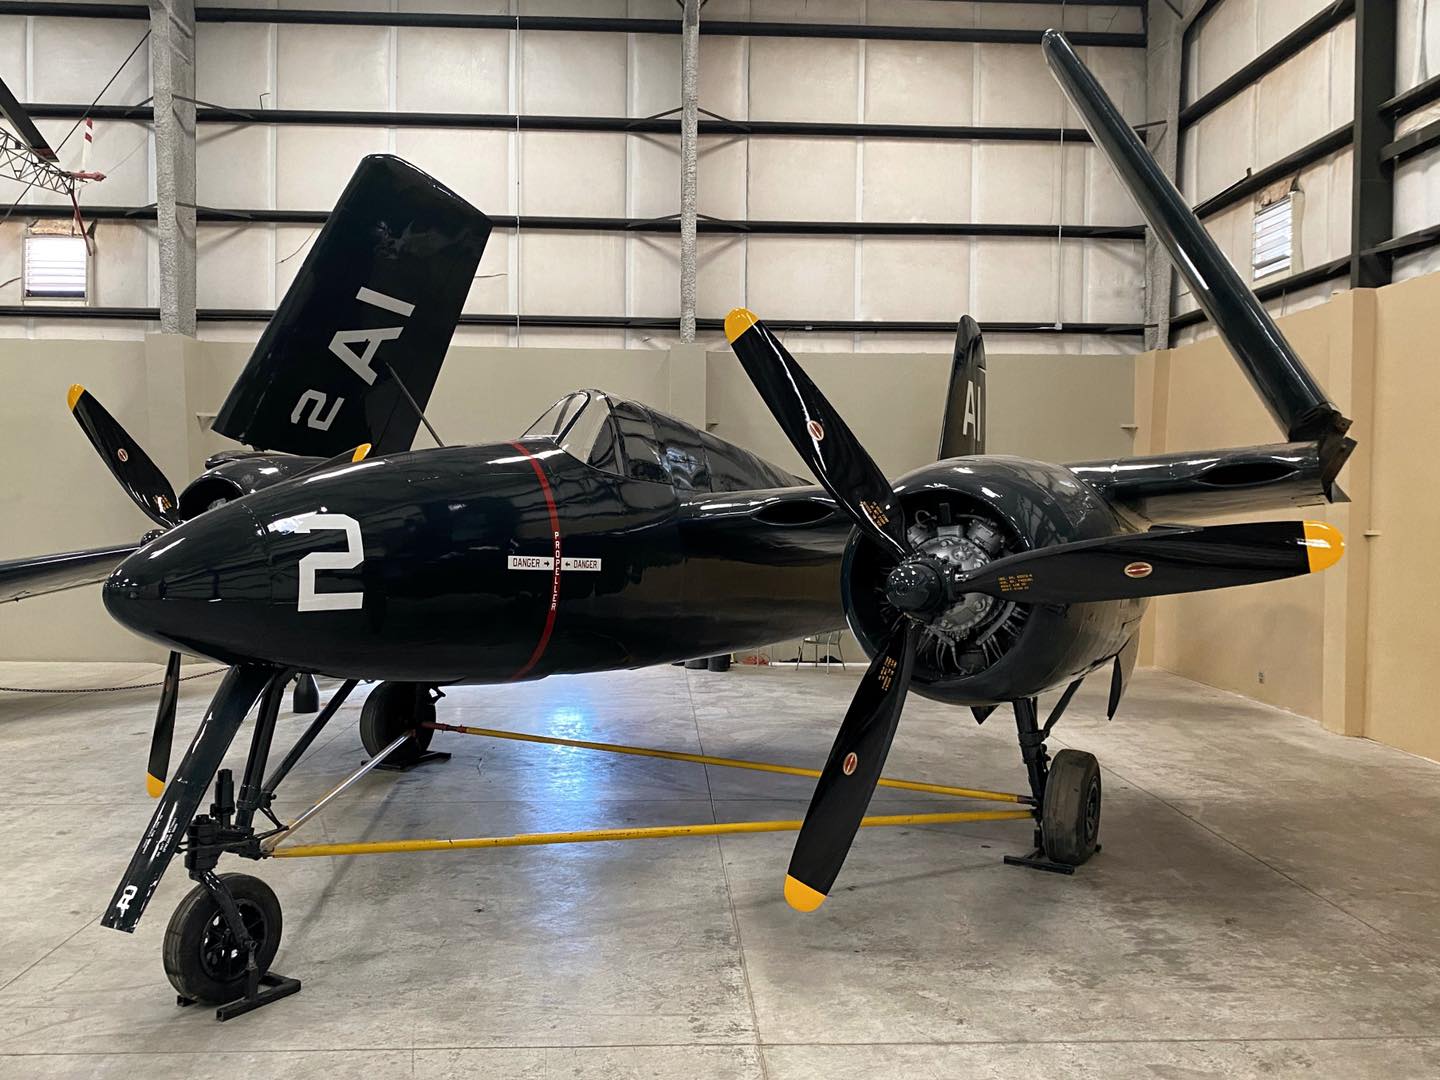 A picture of the Grumman F7F-3 Tigercat